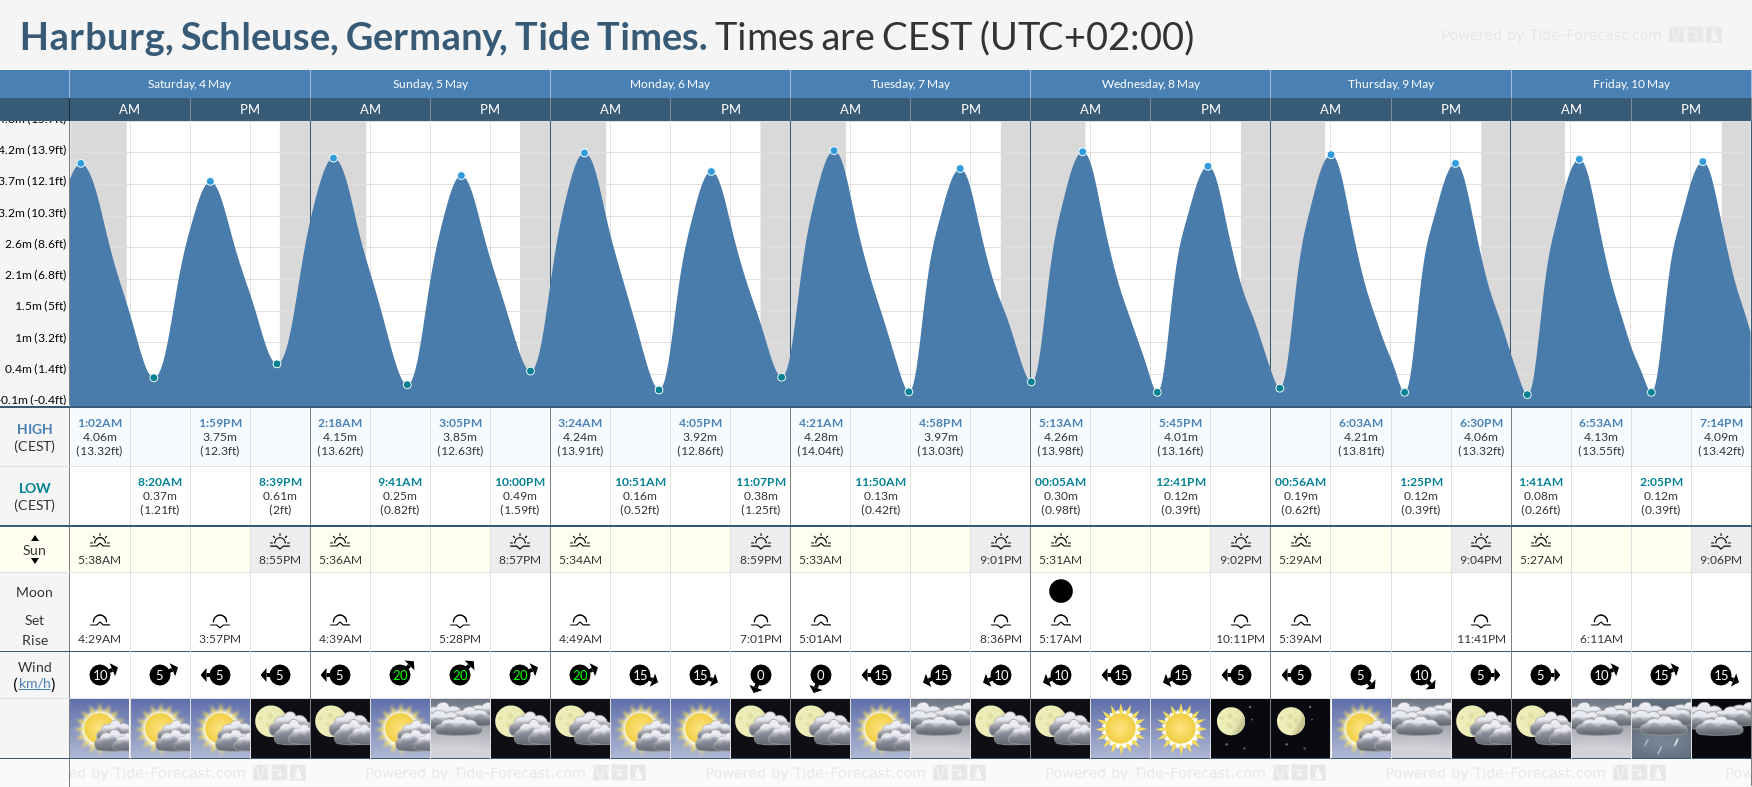 Harburg, Schleuse, Germany Tide Chart including high and low tide tide times for the next 7 days